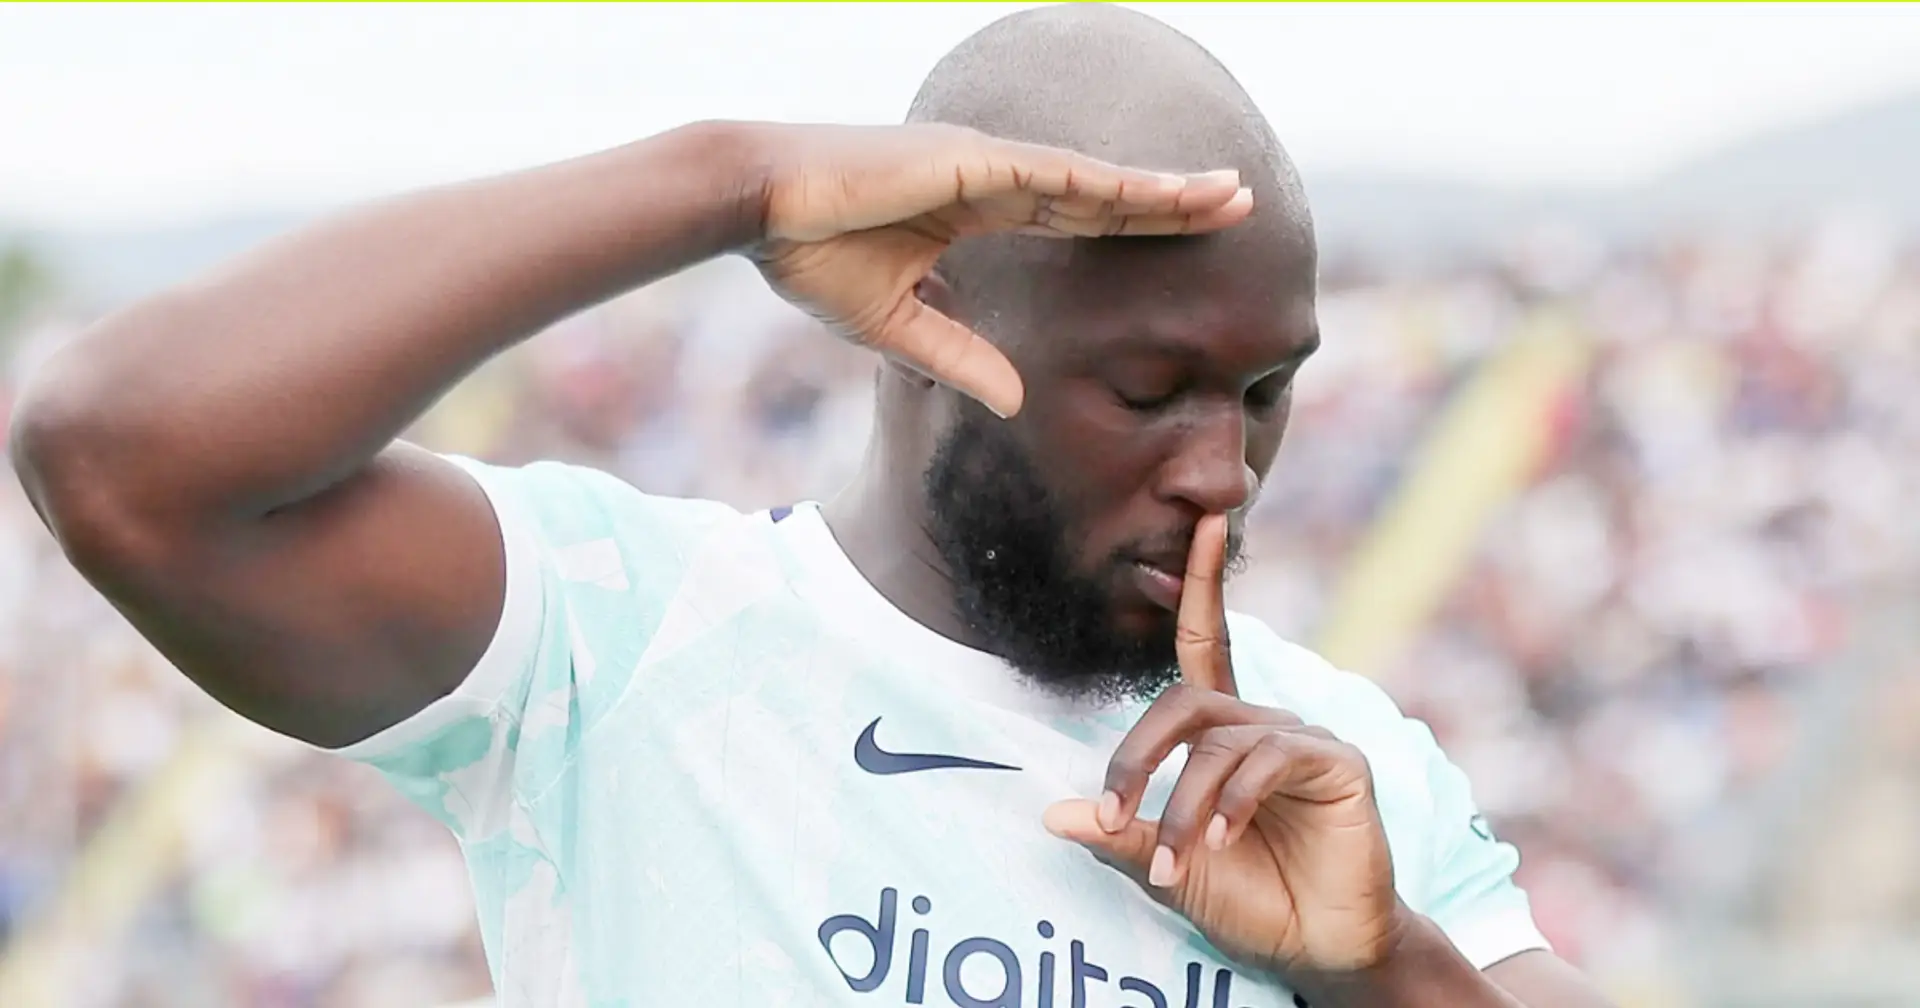 Lukaku 'very greedy and asks for more' after €25m Saudi offer (reliability: 4 stars)